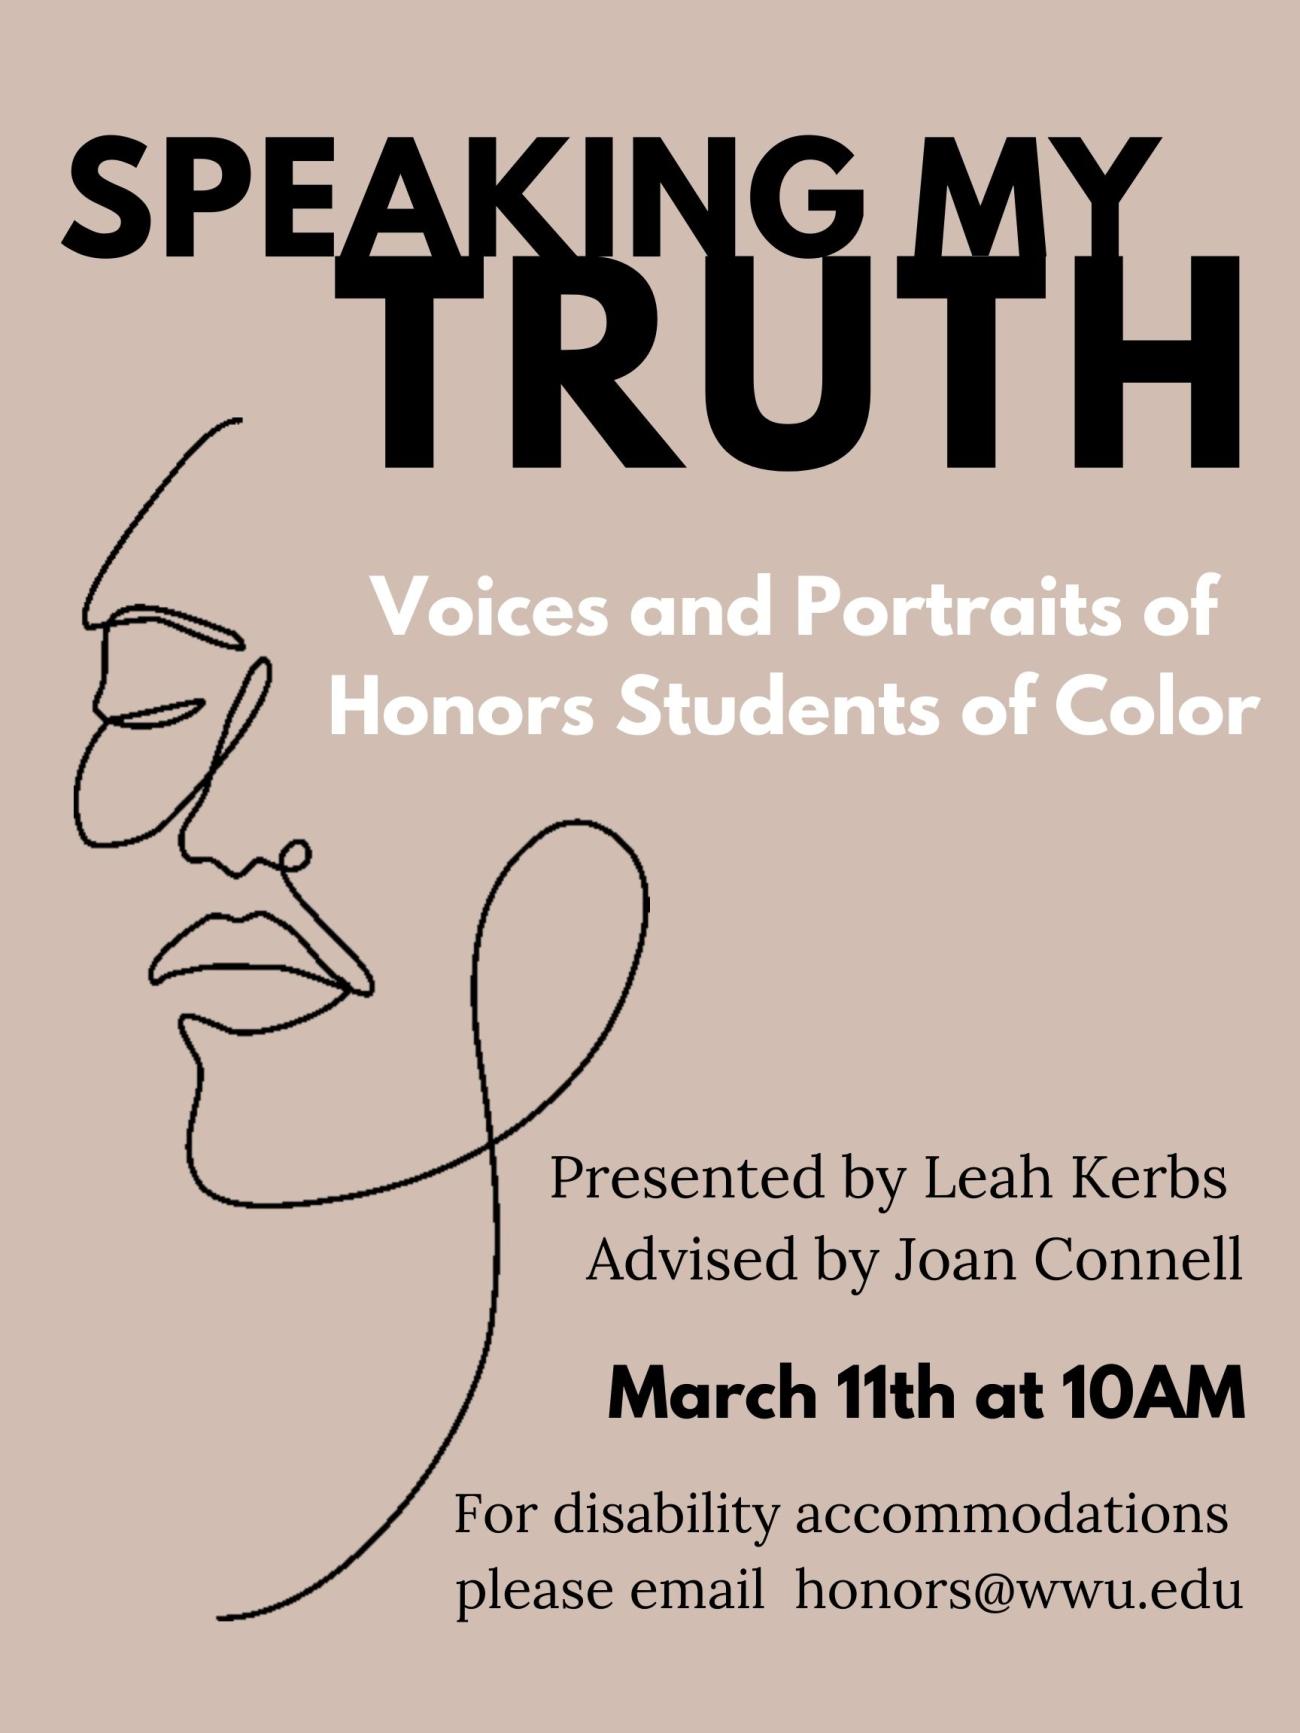 Text reads: "Speaking My Truth: Voices and Portraits of Honors Students of Color. Presented by Leah Kerbs. Advised by Joan Connell. March 11th at 10AM. For disability accommodations please email honors@wwu.edu". To the left is an abstract drawing of a partial face made of a single unbroken black line. Under everything is a plain beige background.